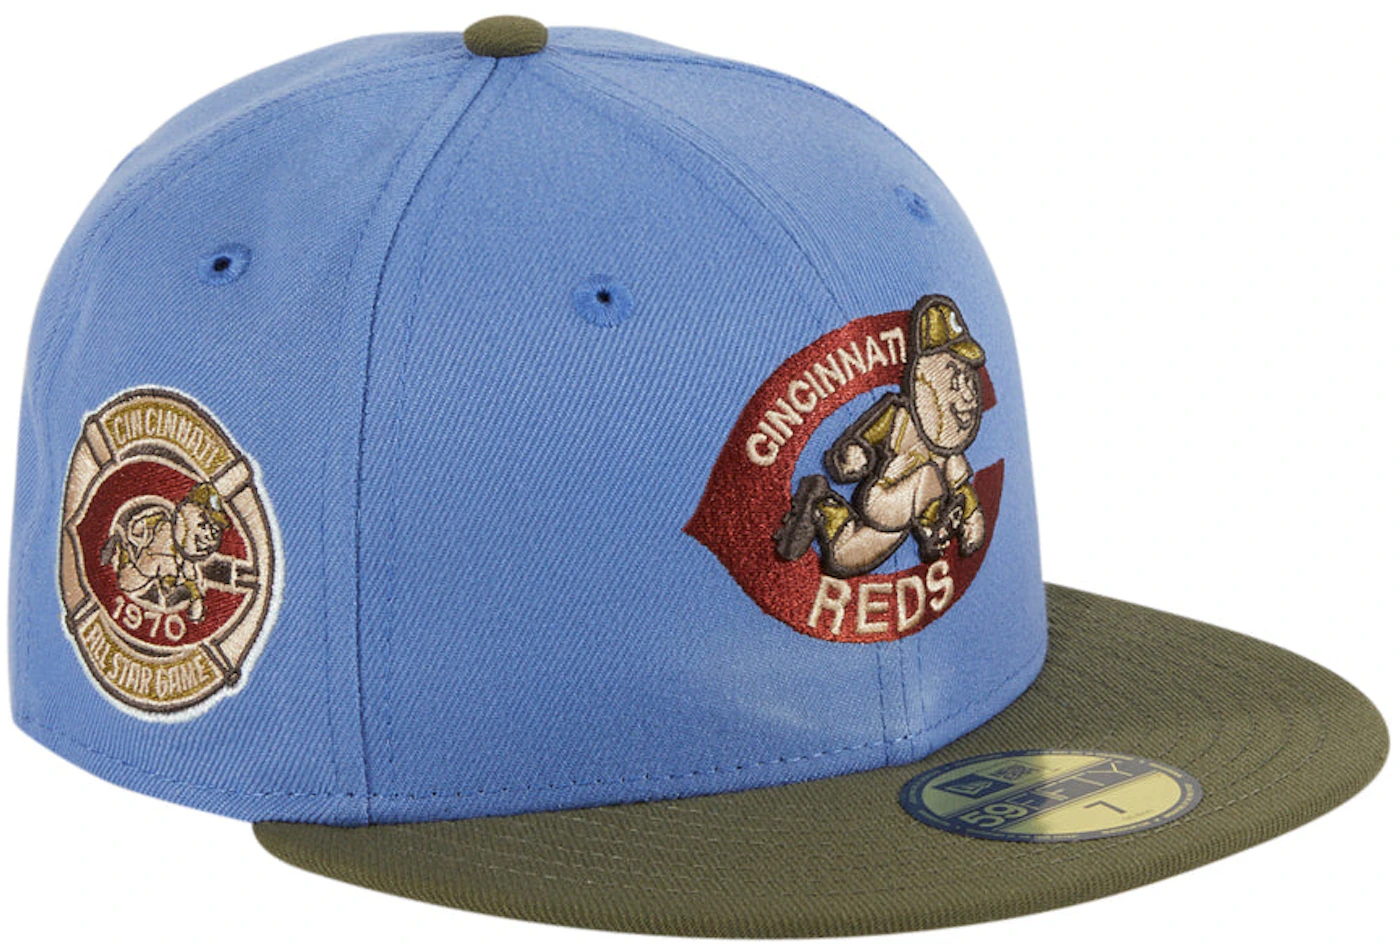 New Era Cincinnati Reds Great Outdoors 1970 All Star Game Patch Hat Club Exclusive 59FIFTY Fitted Hat Indigo/Olive